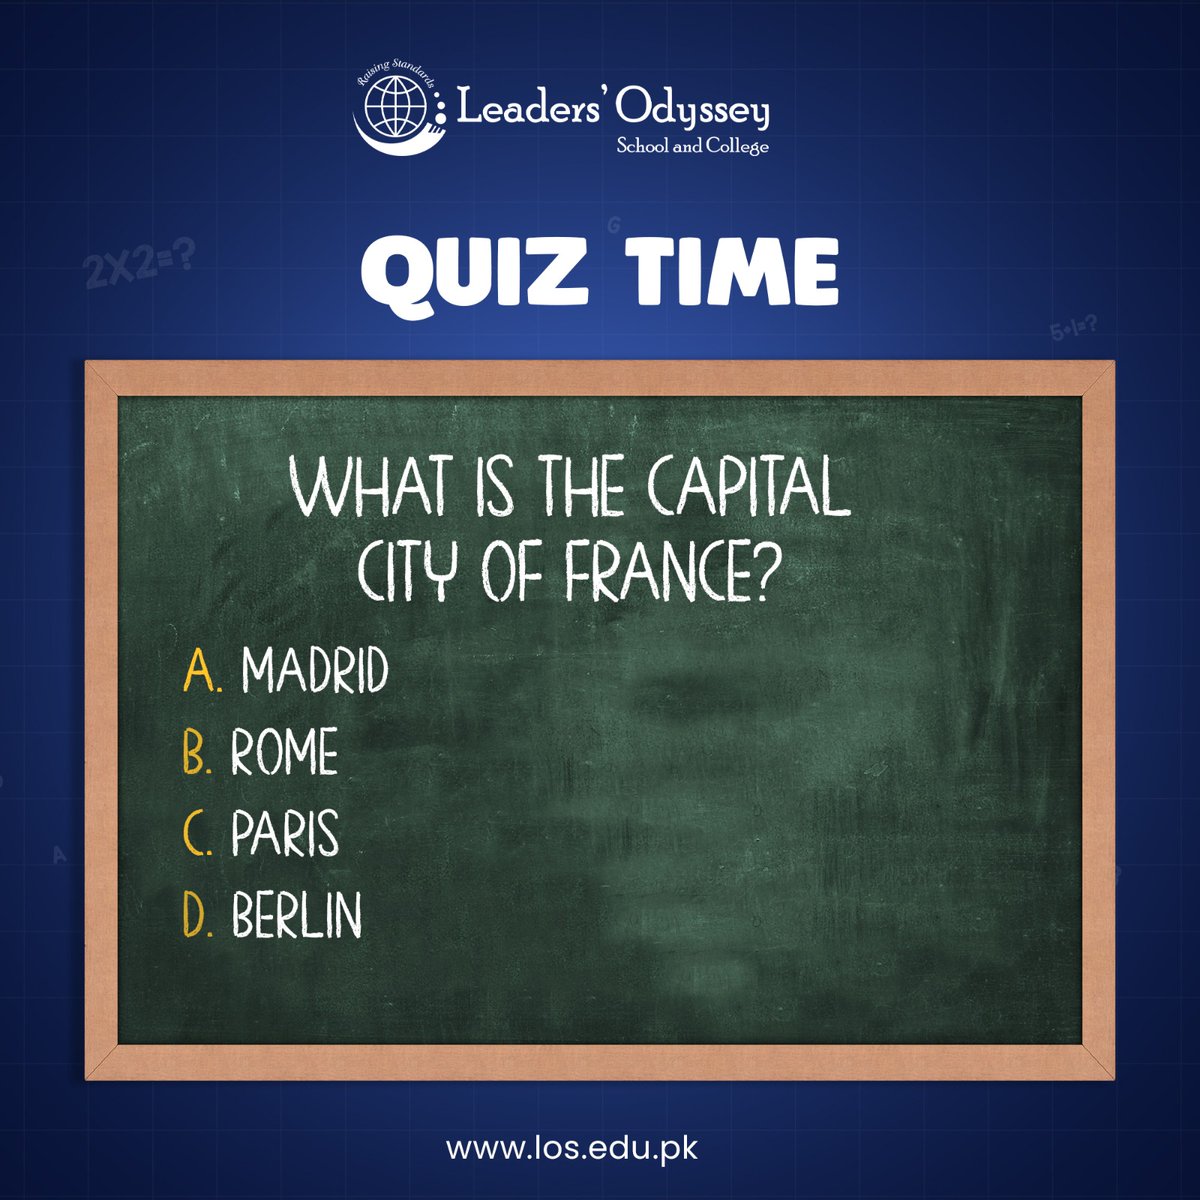 🌍 QUIZ TIME! 🌟

Test your knowledge with this geography question:

🗺️ What is the capital of France? 🇫🇷

A. Madrid B. Rome C. Papis D. Berlin
🤔 Think you know the answer? Comment below!
#QuizTime #GeographyQuiz #CapitalTrivia #TestYourKnowledge #FranceTrivia #GuessTheCapital